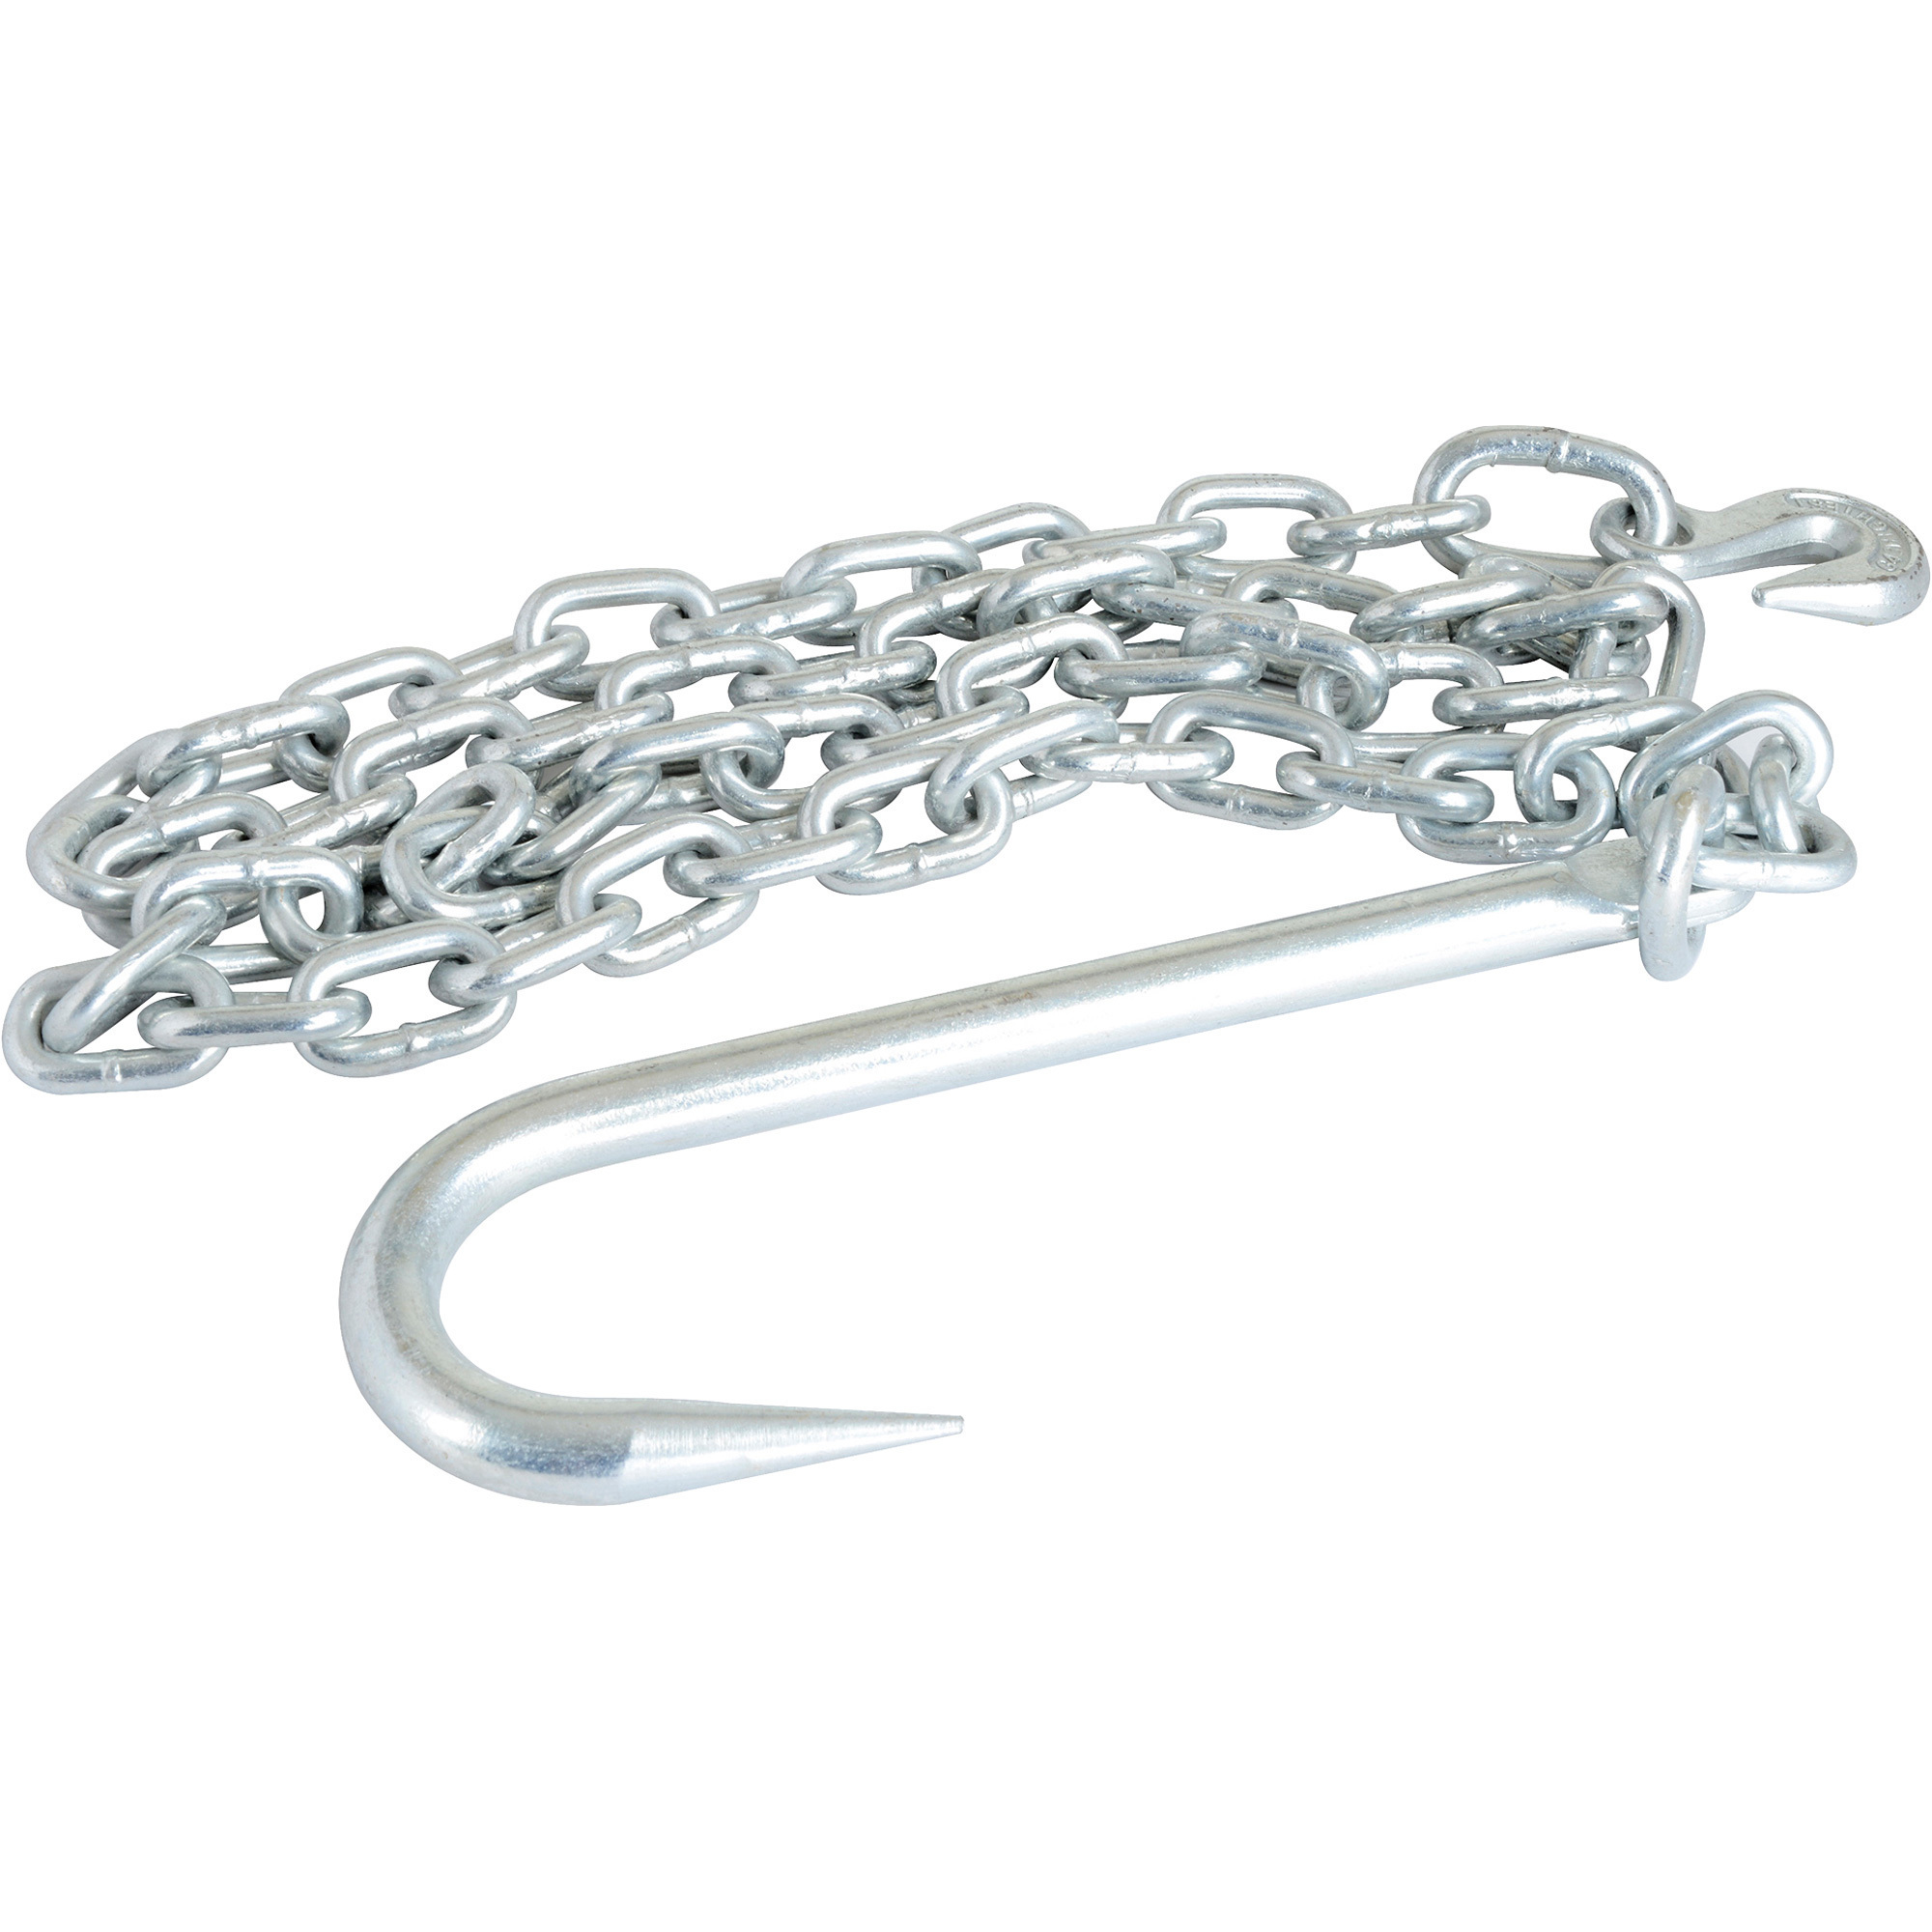 Ironton 80Inch Chain with 15Inch Grab Hook